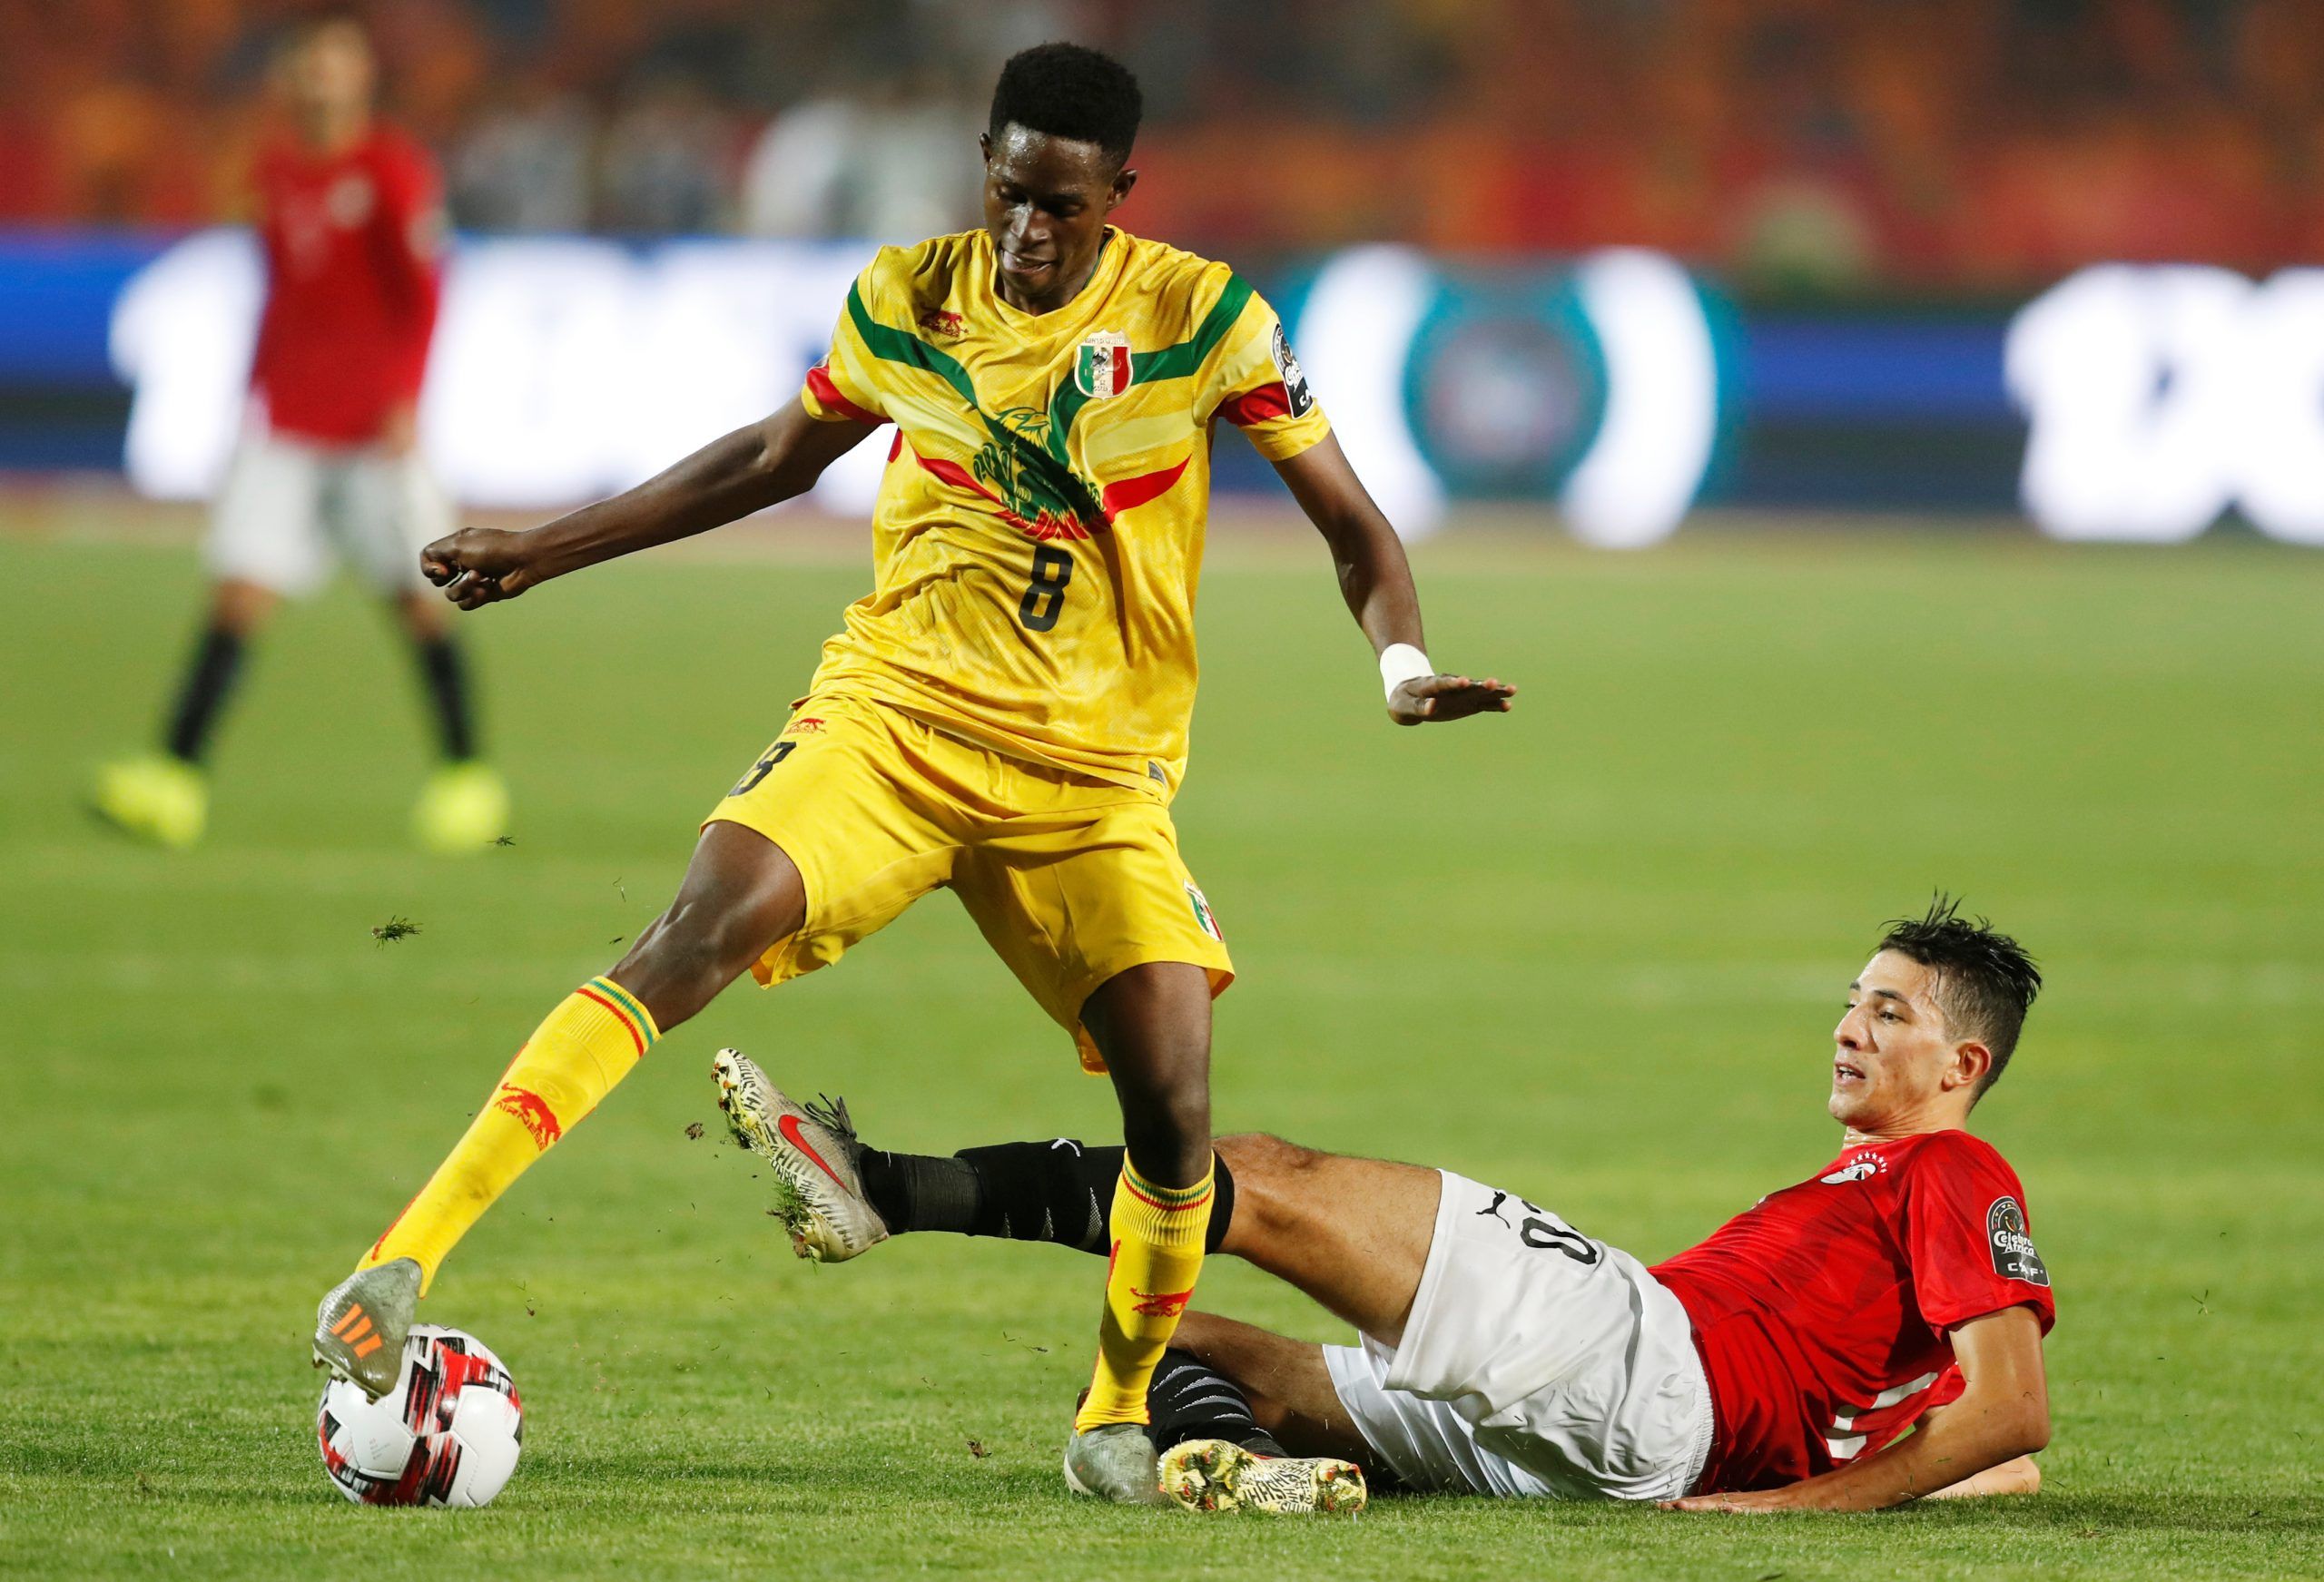 Soccer Football - Africa Under 23 Cup of Nations - Group A - Egypt U23 v Mali U23 - Cairo International Stadium, Cairo, Egypt - November 8, 2019   Mali's Boubacar Traore in action with Egypt's Ahmed Fatouh     REUTERS/Amr Abdallah Dalsh